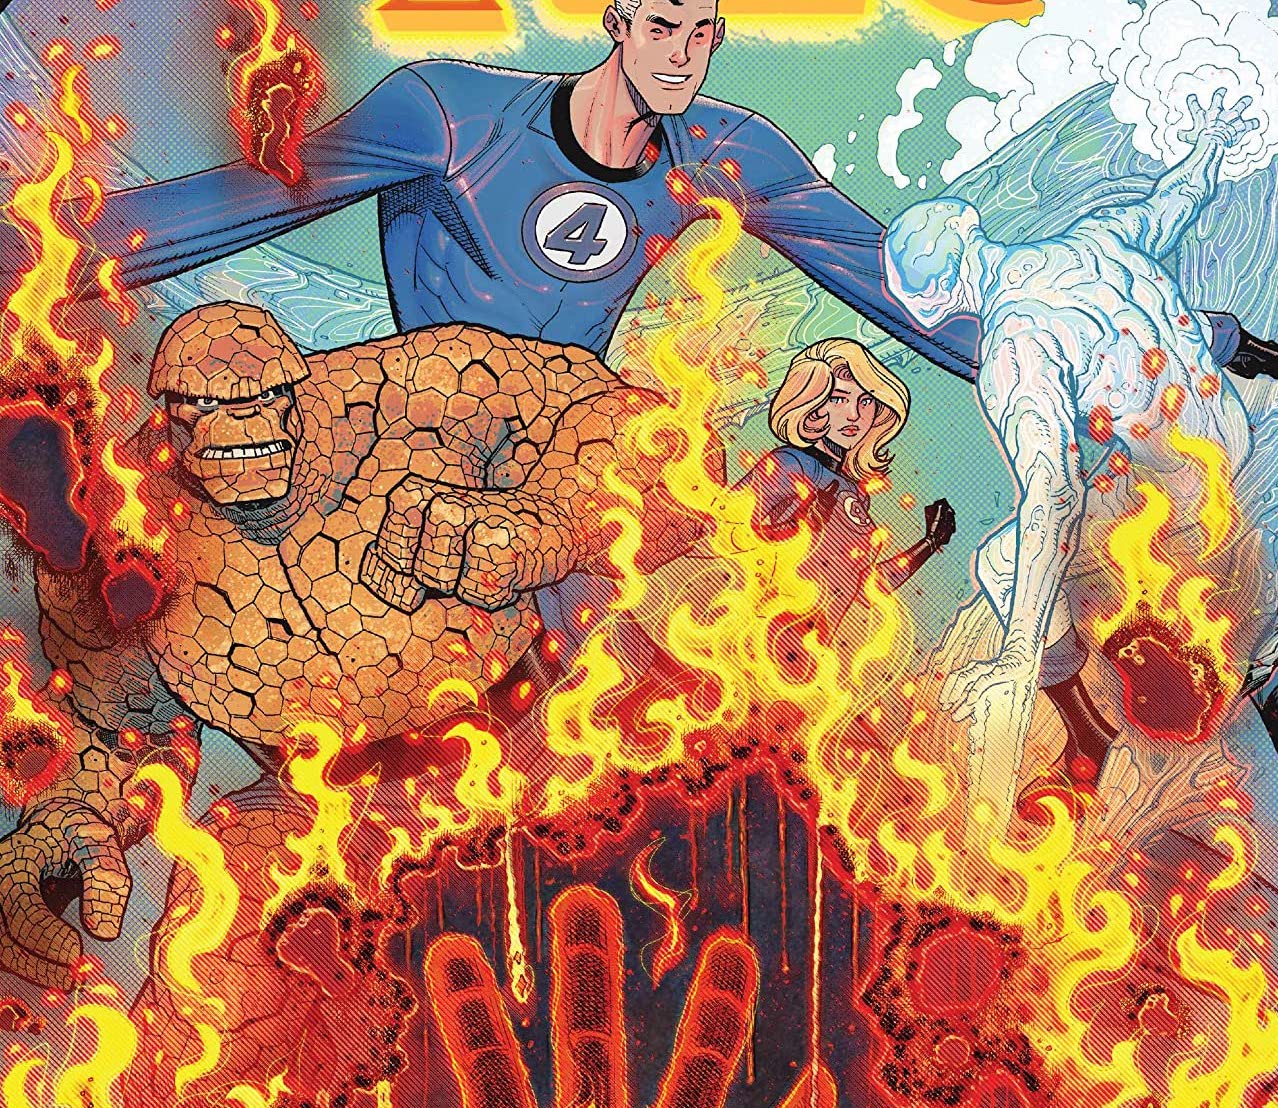 'Fantastic Four' #24 review: Wholesome and fun